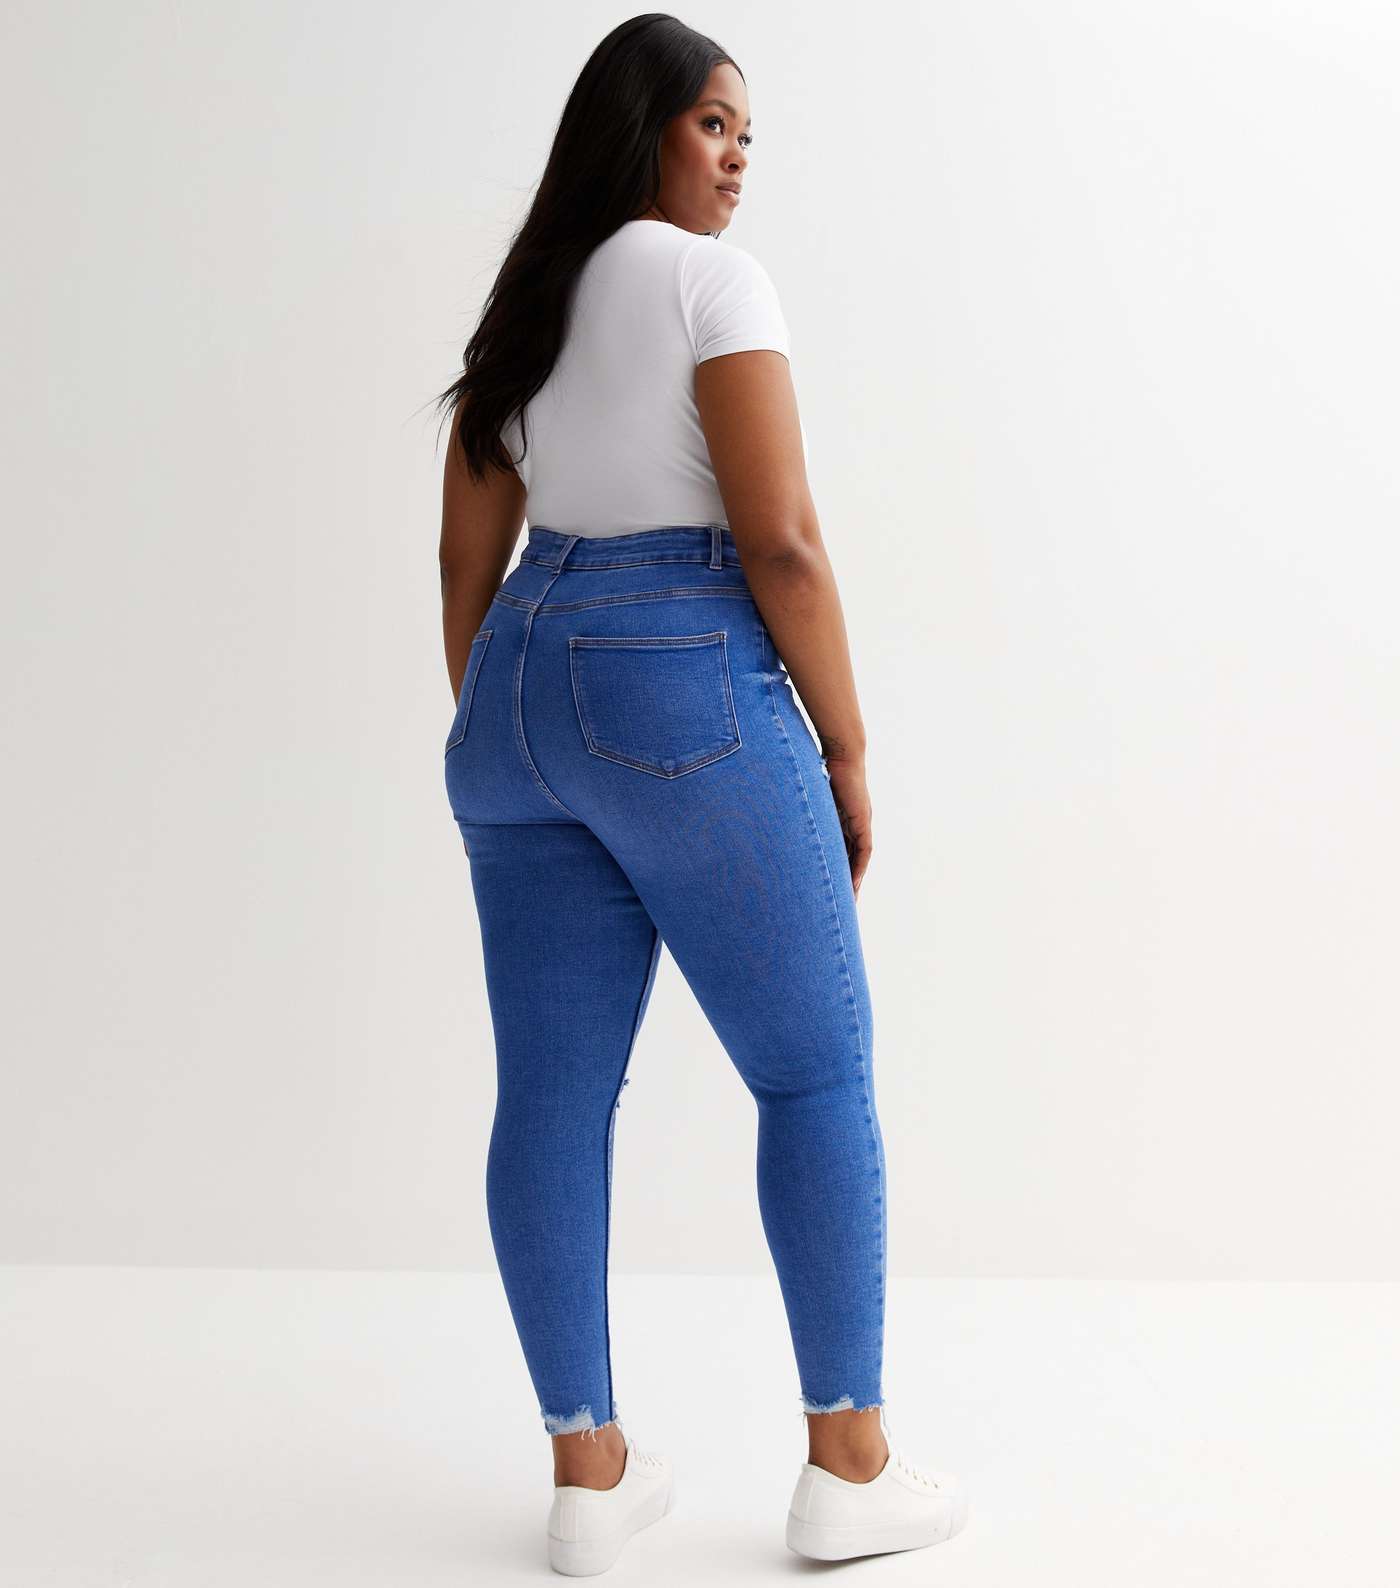 Curves Bright Blue Ripped High Waist Hallie Super Skinny Jeans Image 4